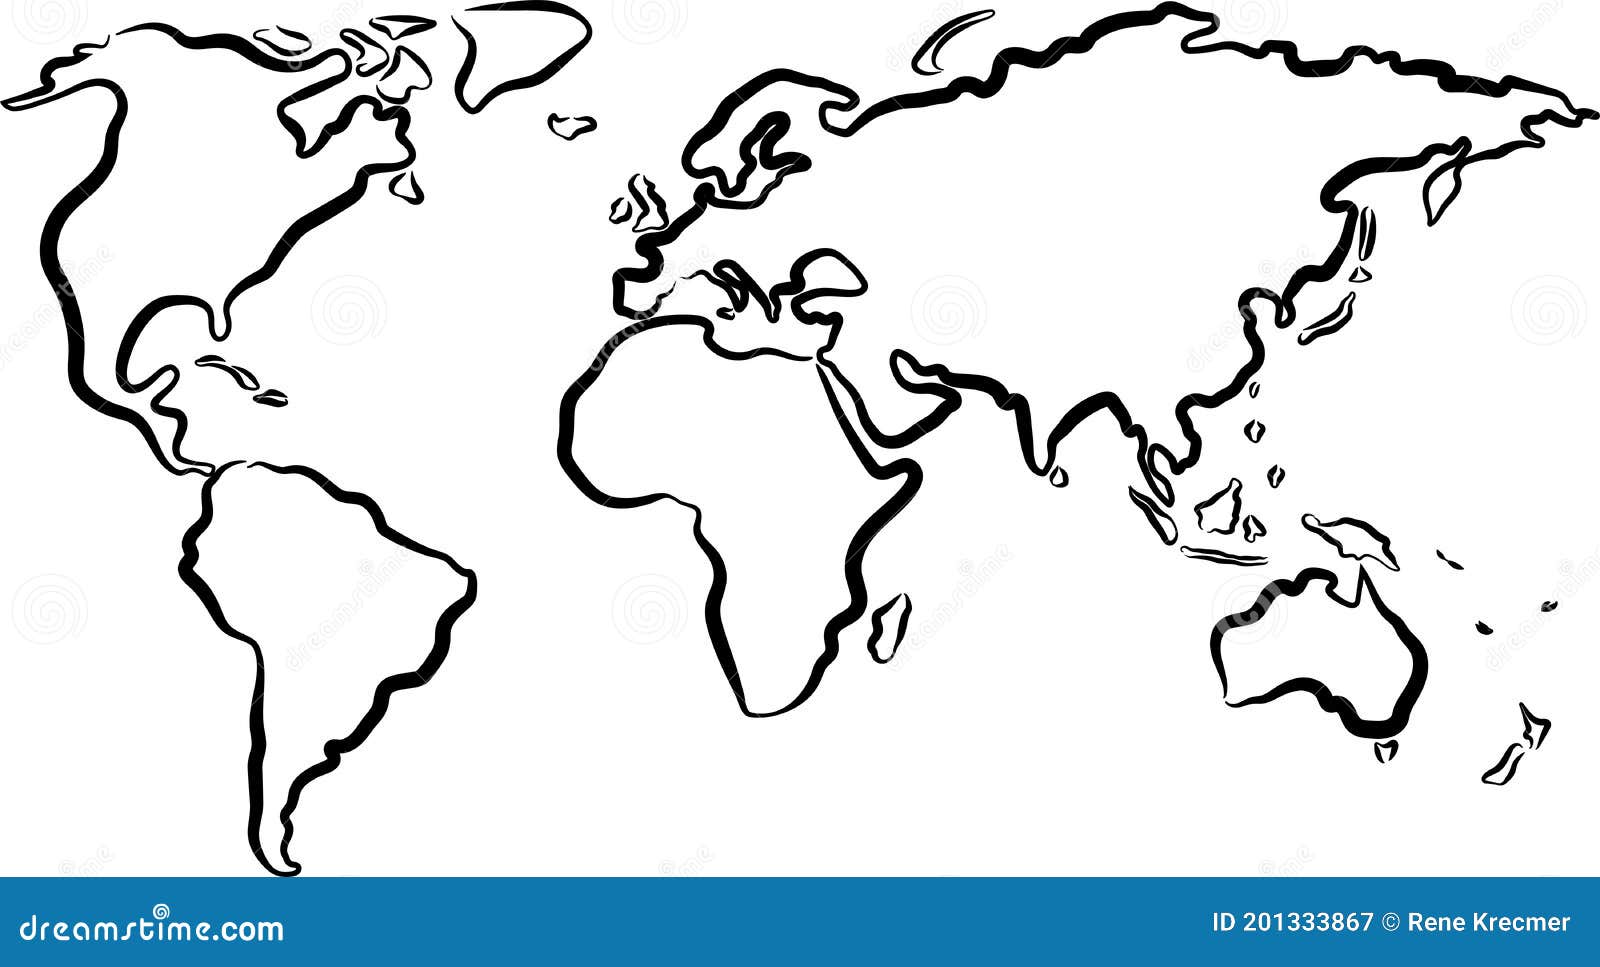 Drawing Images Of World Map – Bornmodernbaby